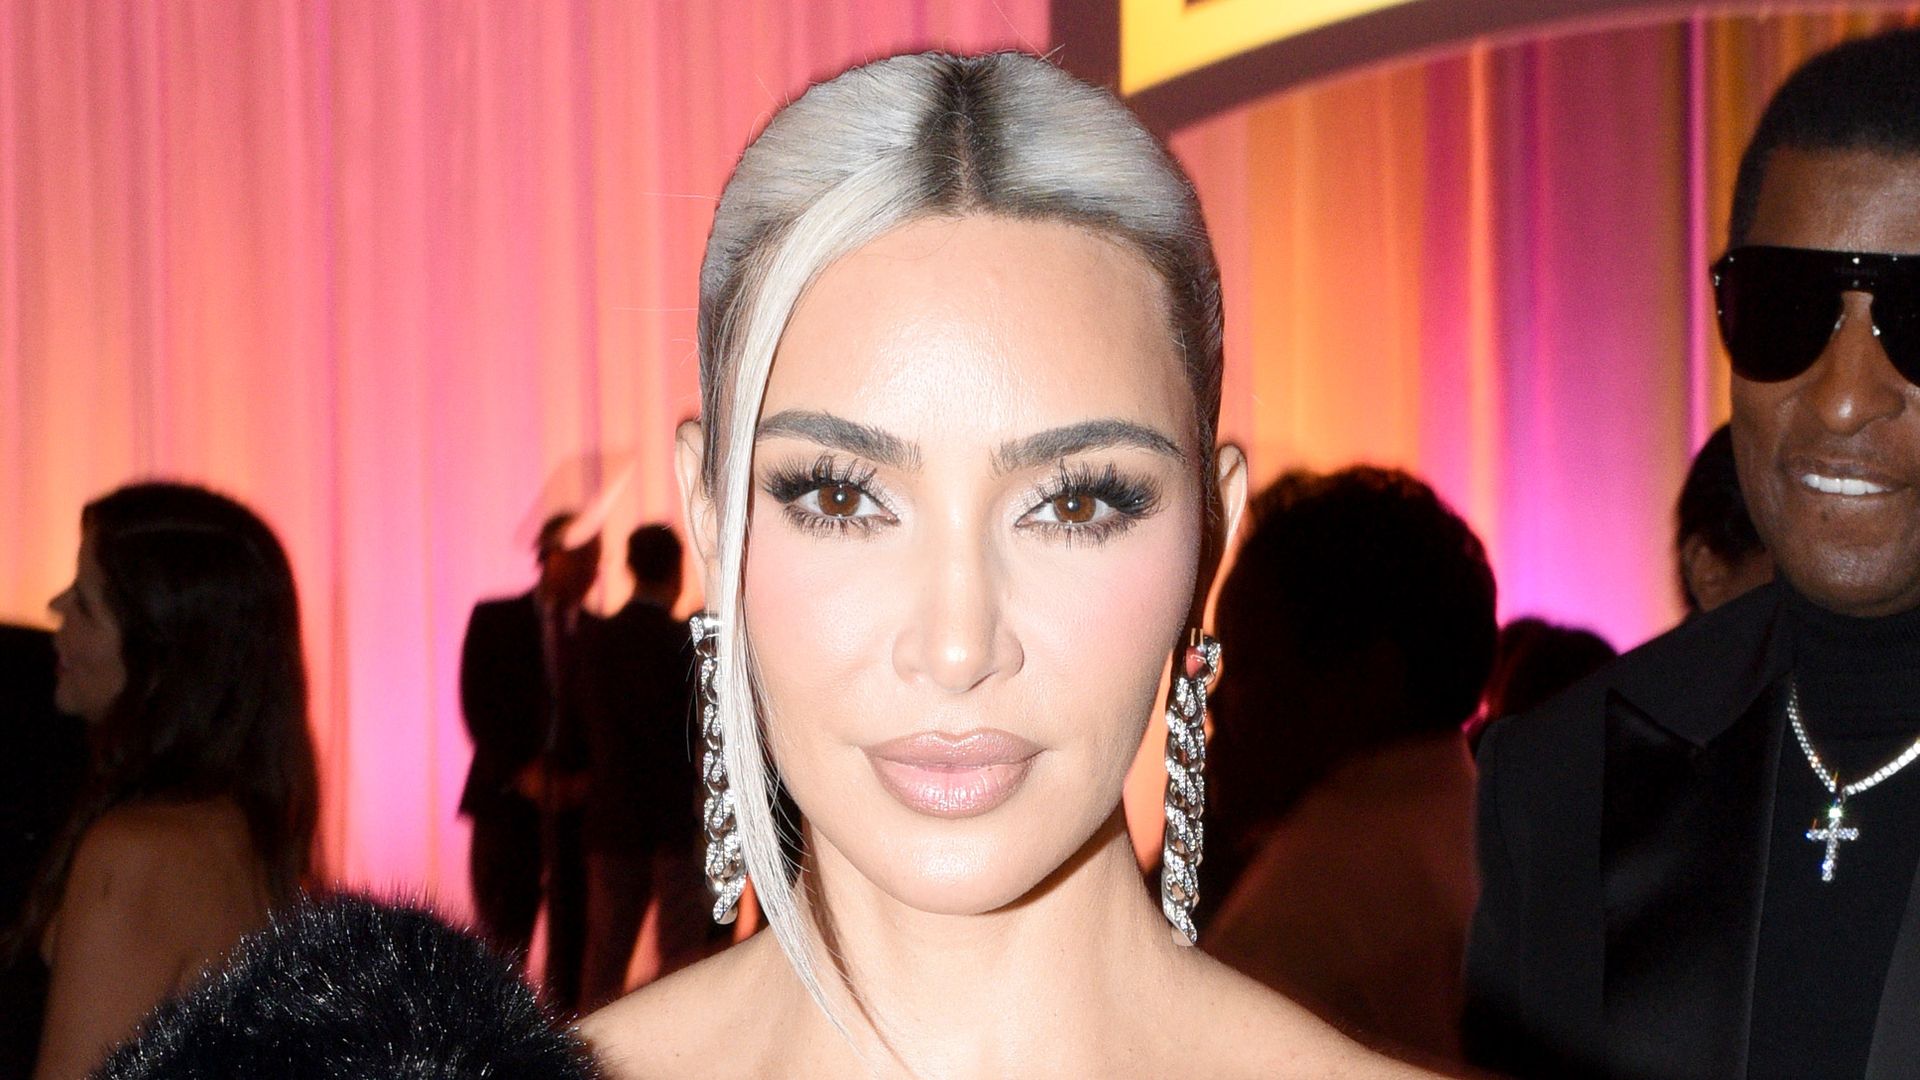 Kim Kardashian recreates her most controversial hairstyle to date - and fans are losing it